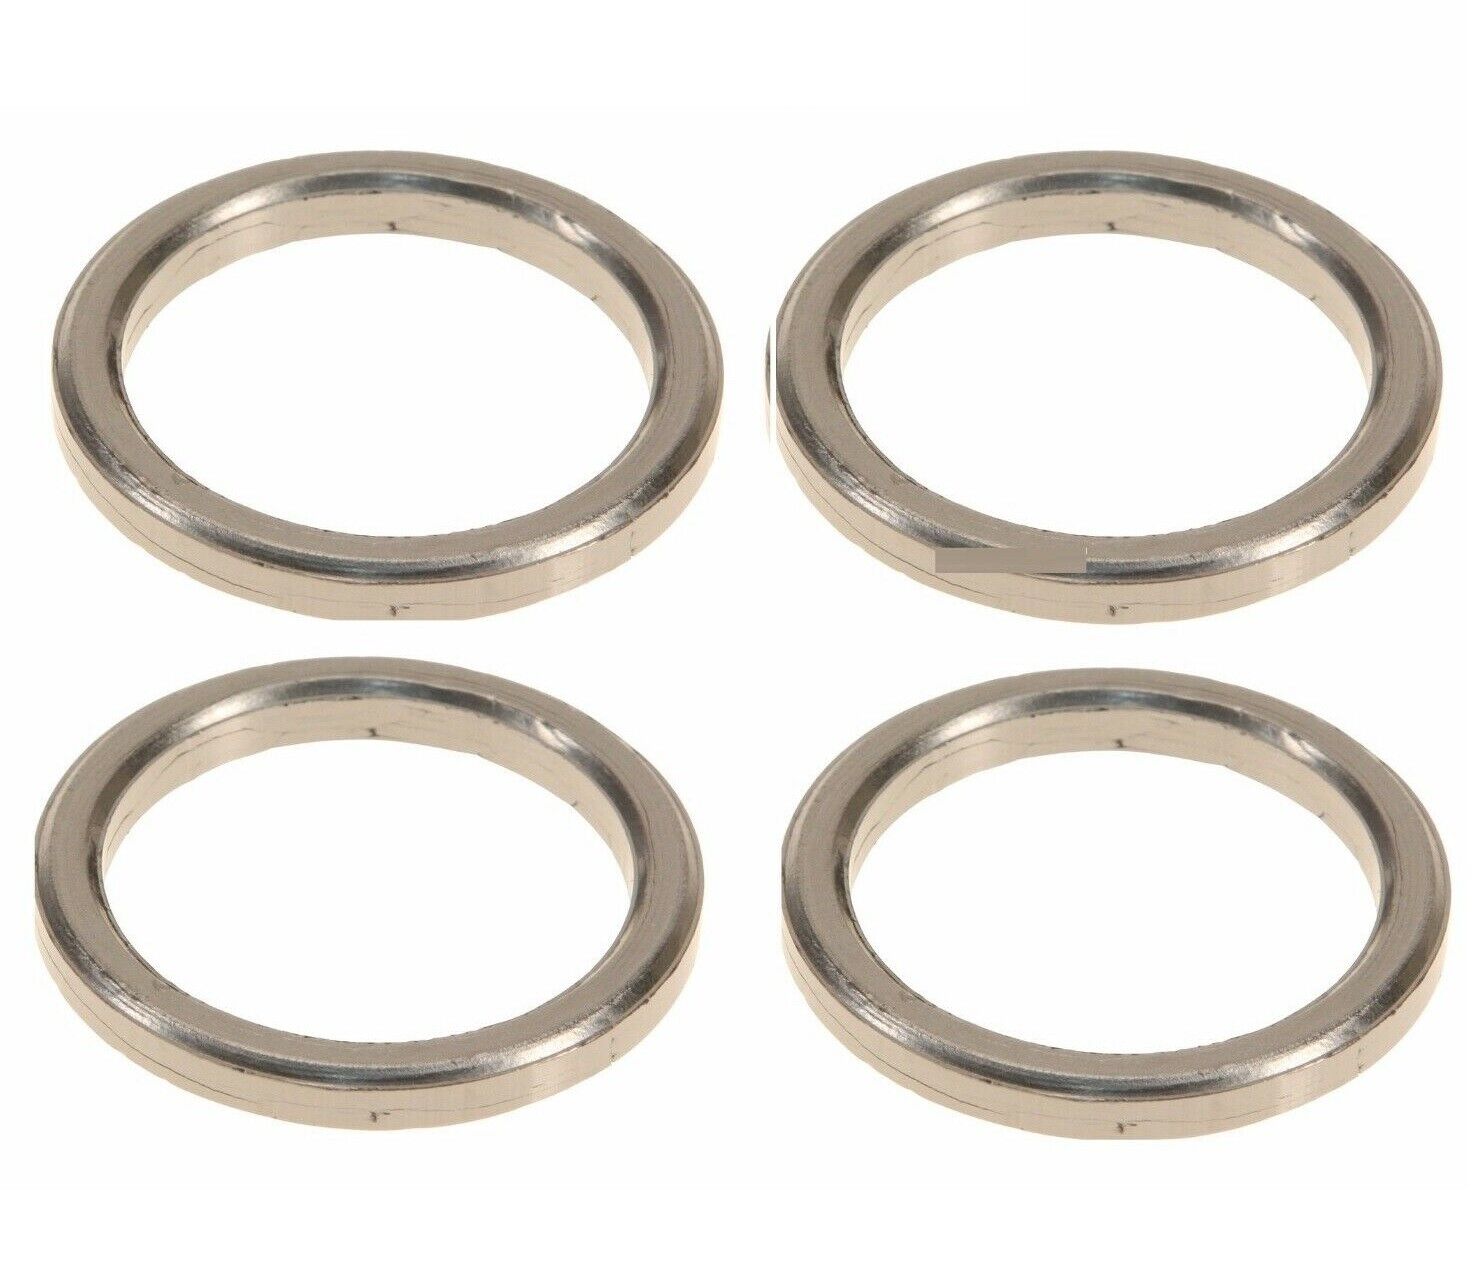 ELRING Set of 4 Exhaust Manifold Gaskets For F30 F32 F33 F34 F10 E84 F25 F15 E89